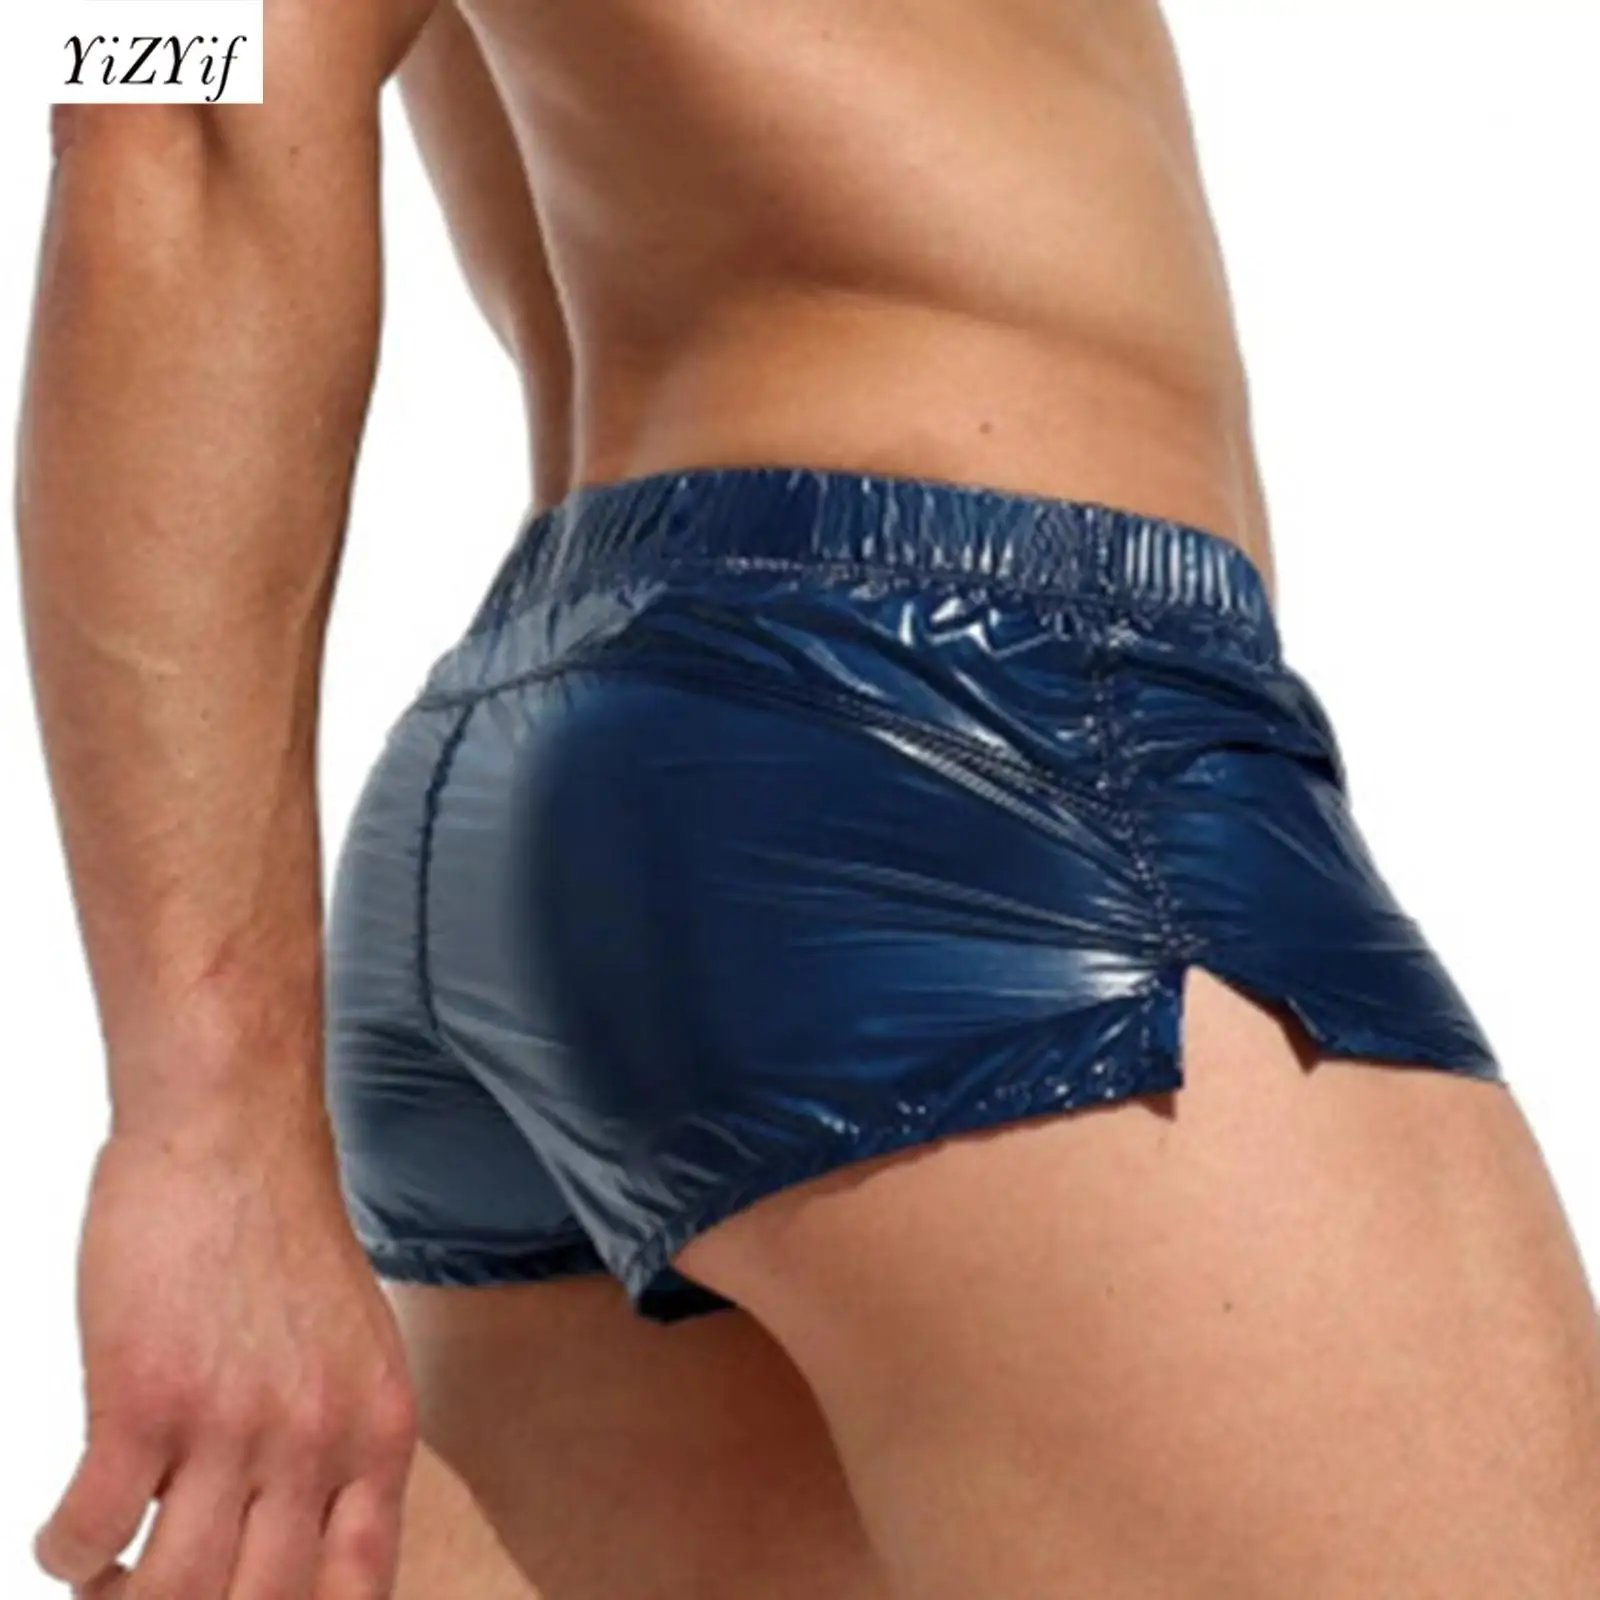 Mens Glossy Shorts Solid Color Low Rise Sides Slit Slim Fit Trunks Underpants Beach Pool Night Club Party Shorts Boxer Clubwear sexy low rise fur lined denim shorts women booty short jeans ultra short beach vacation wear girls club party ripped hole shorts